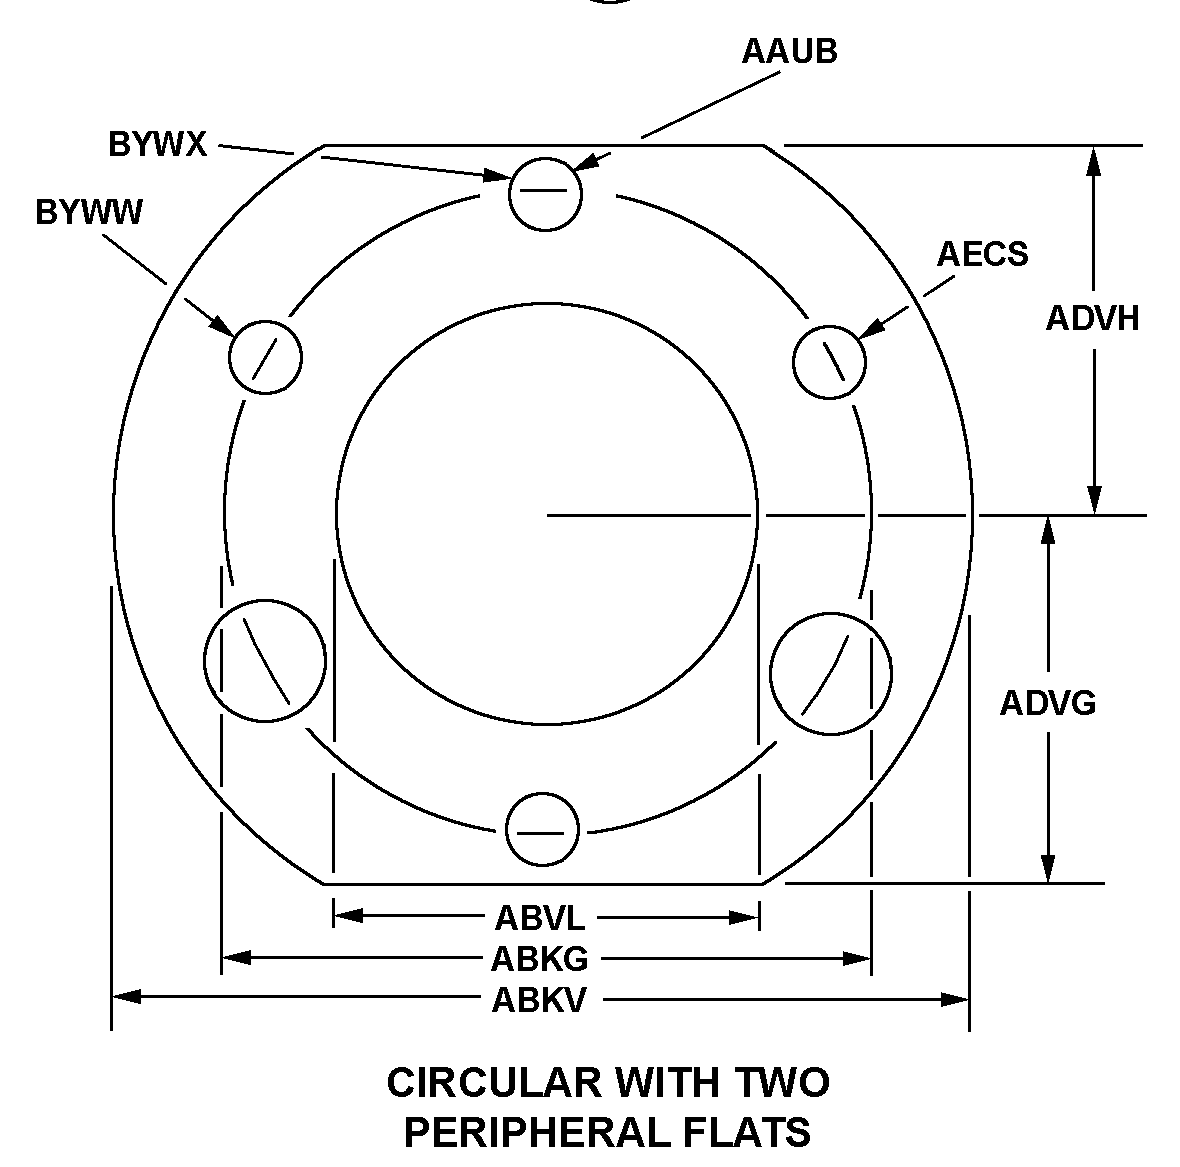 CIRCULAR WITH TWO PERIPHERAL FLATS style nsn 5330-01-099-6413